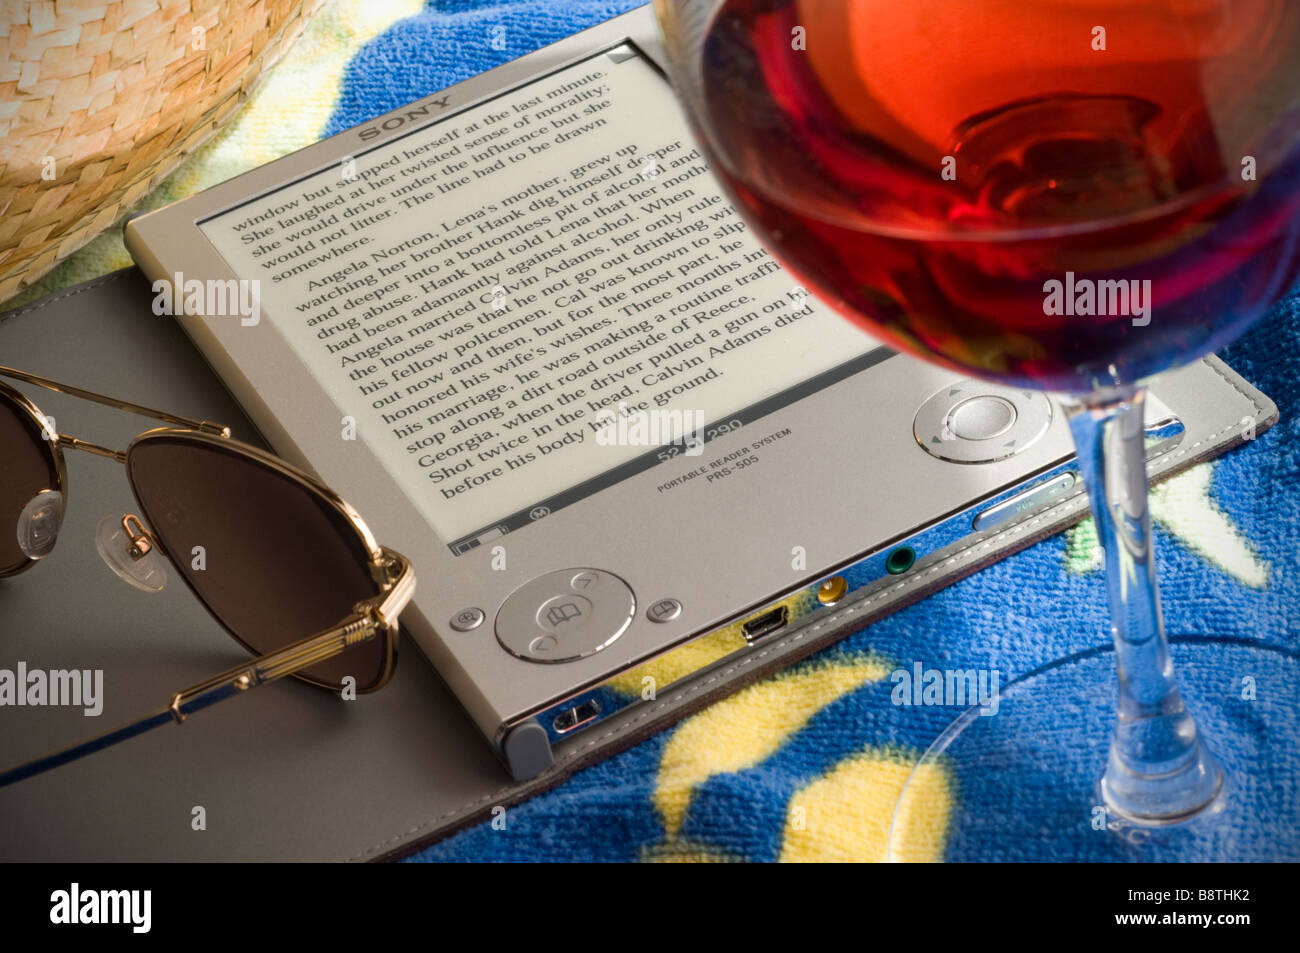 Sony eReader PRS-505, 2008 first generation electronic portable book reader reading device in vacation setting, with wine beach towel and sun glasses Stock Photo